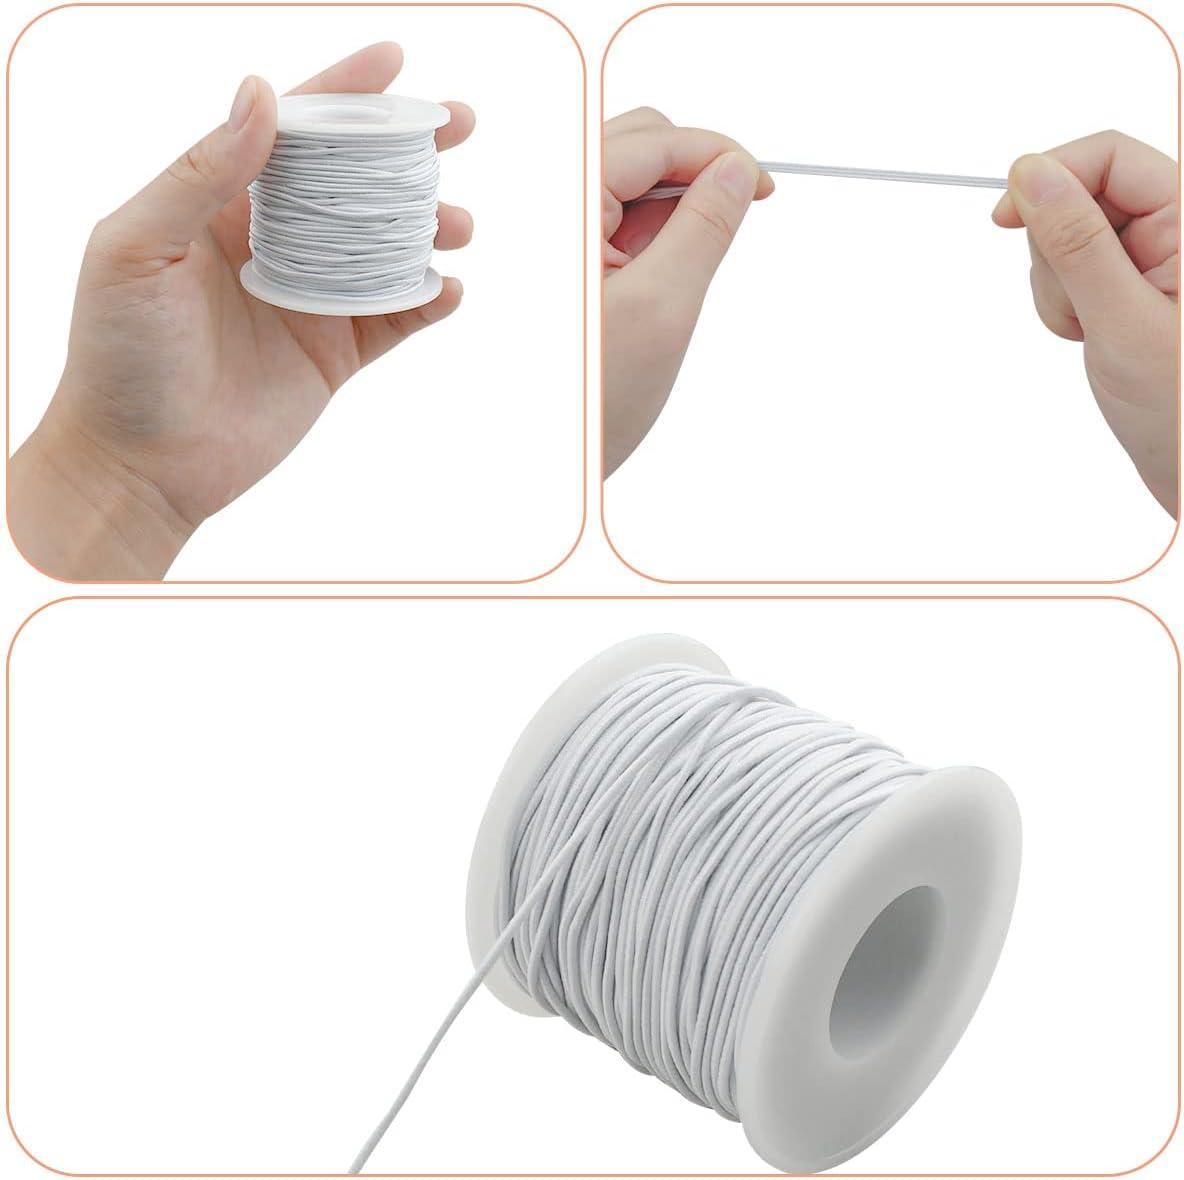 Stretchy String for Bracelets, 4 Rolls 1 mm Sturdy Elastic String Elastic Cord  for Jewelry Making, Necklaces, Beading (2 Black+ 2 White)